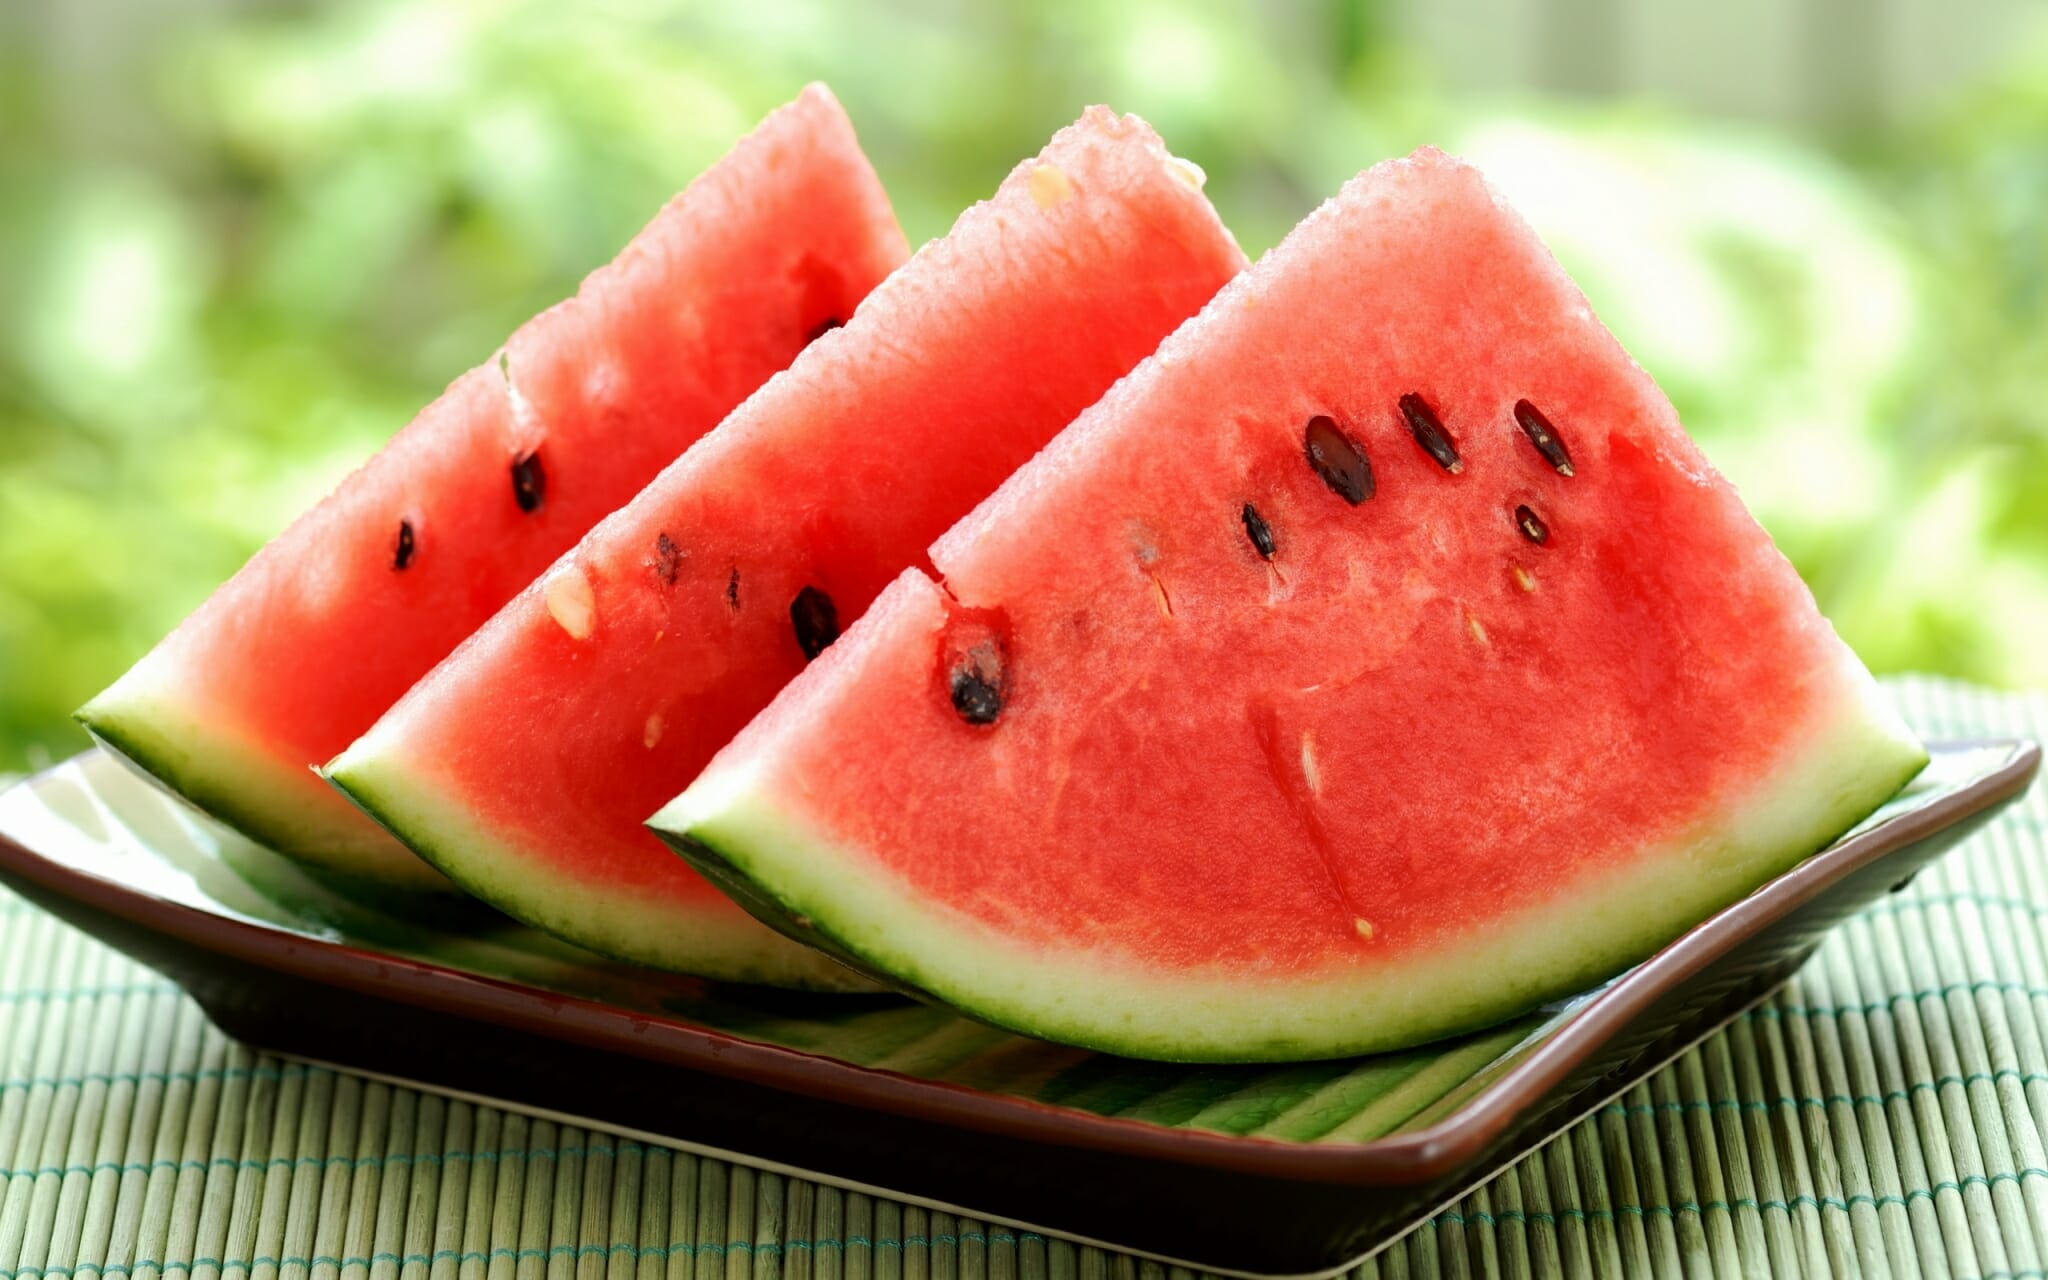 How to Pick the Perfect Watermelon: 5 Tips From an Experienced Farmer